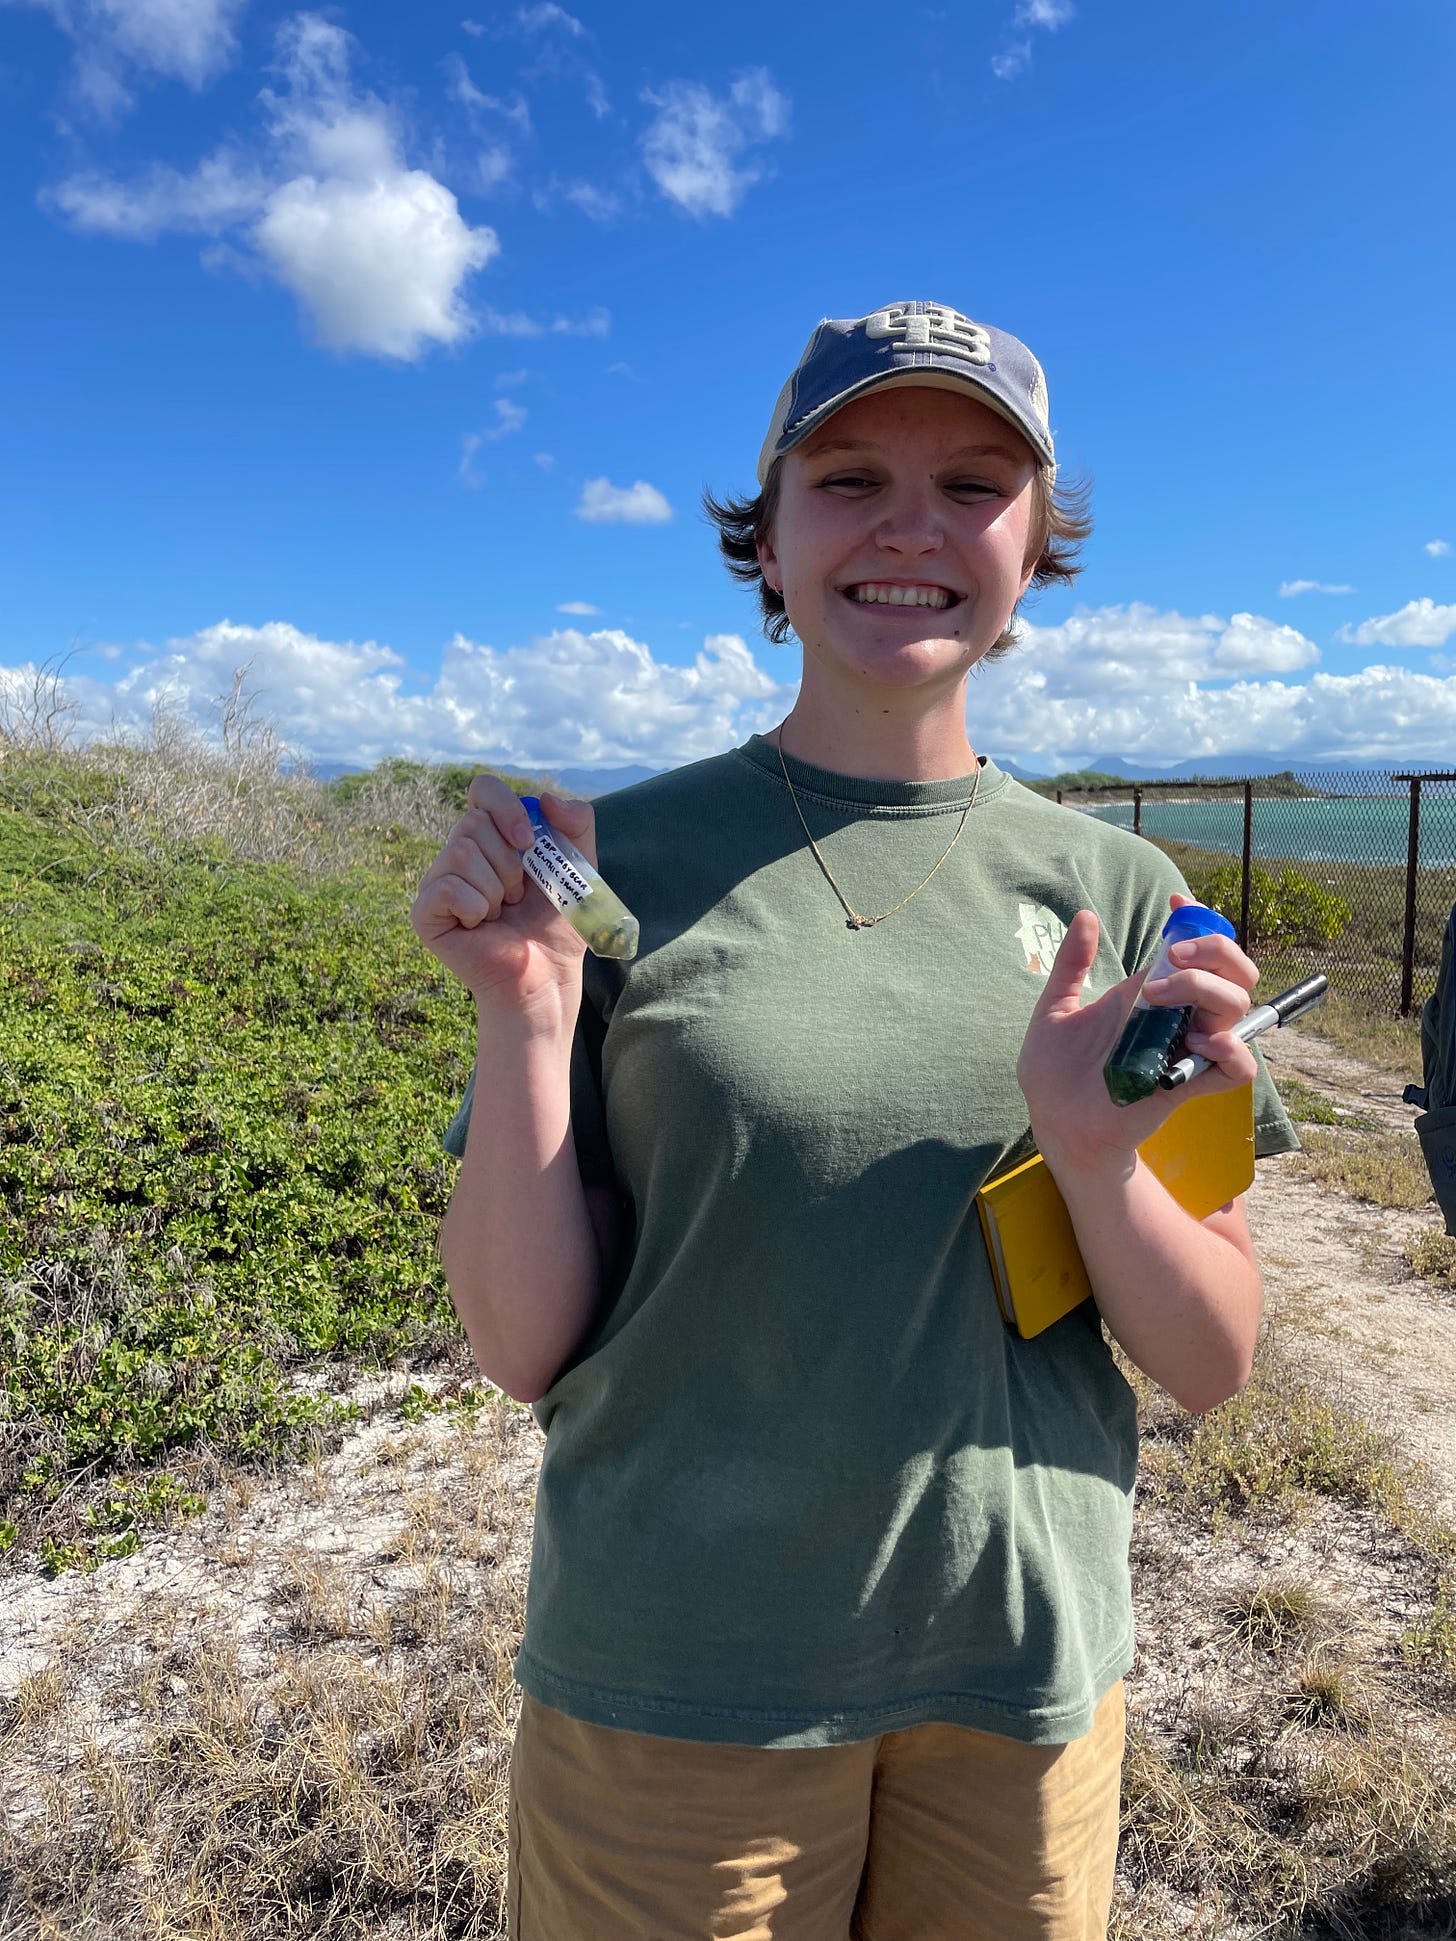 Image Description: Zoe, a white nonbinary person, is beaming towards the camera and holding far too many things ( including a notebook, a pen, and two tubes of green algae) on the coast of Oahu. The ocean is visible in the background with ground cover plants and a dirt road closer to the foreground.